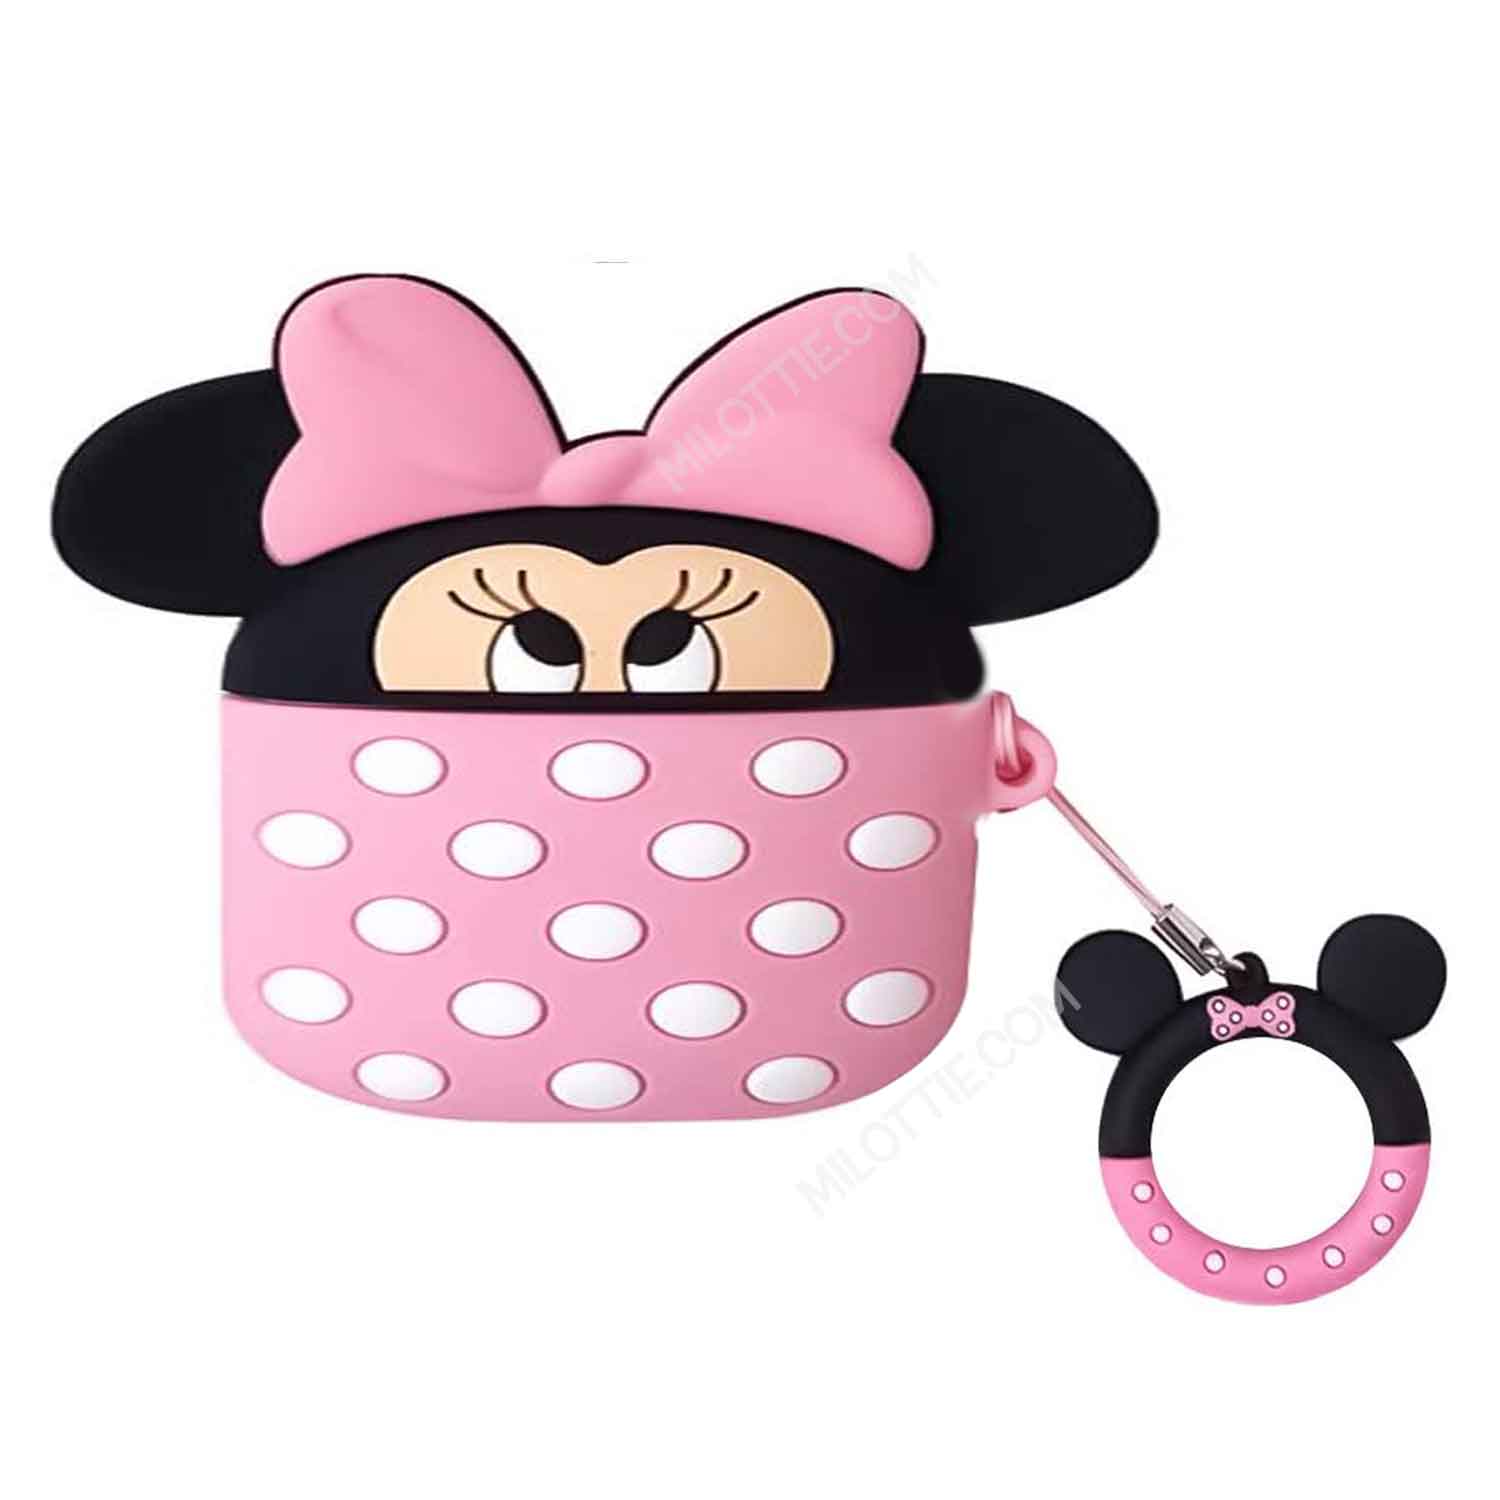 Minnie Mouse Apple Airpods Case - 0